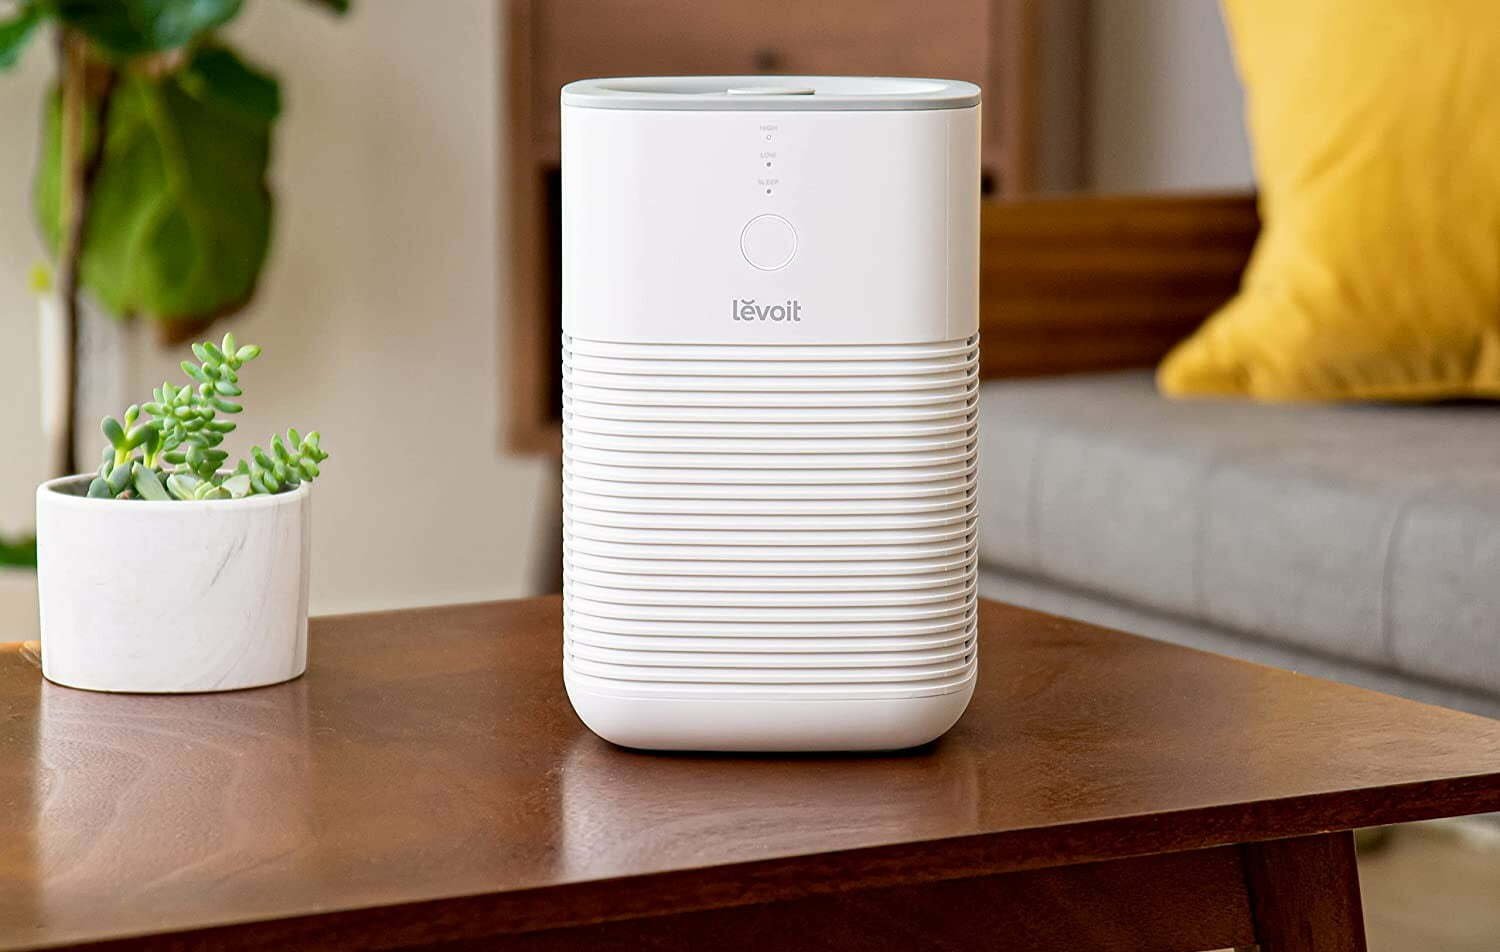 How Much Electricity Does An Air Purifier Use?